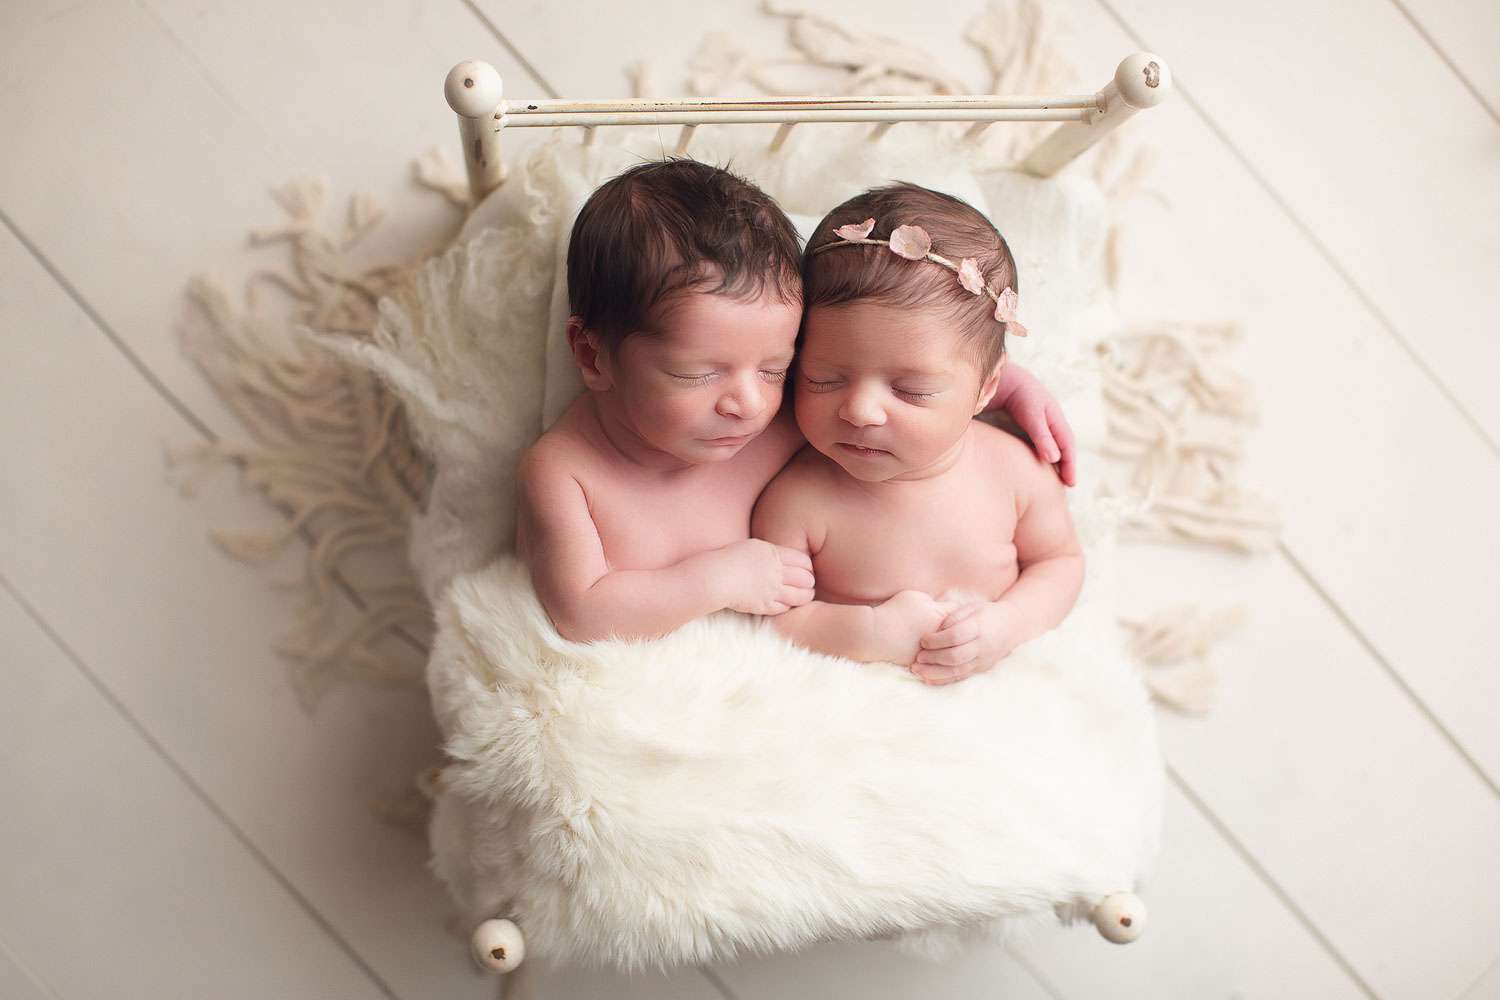 twins newborn siblings boy and girl sleeping in a white bed | Jana photography | vancouver